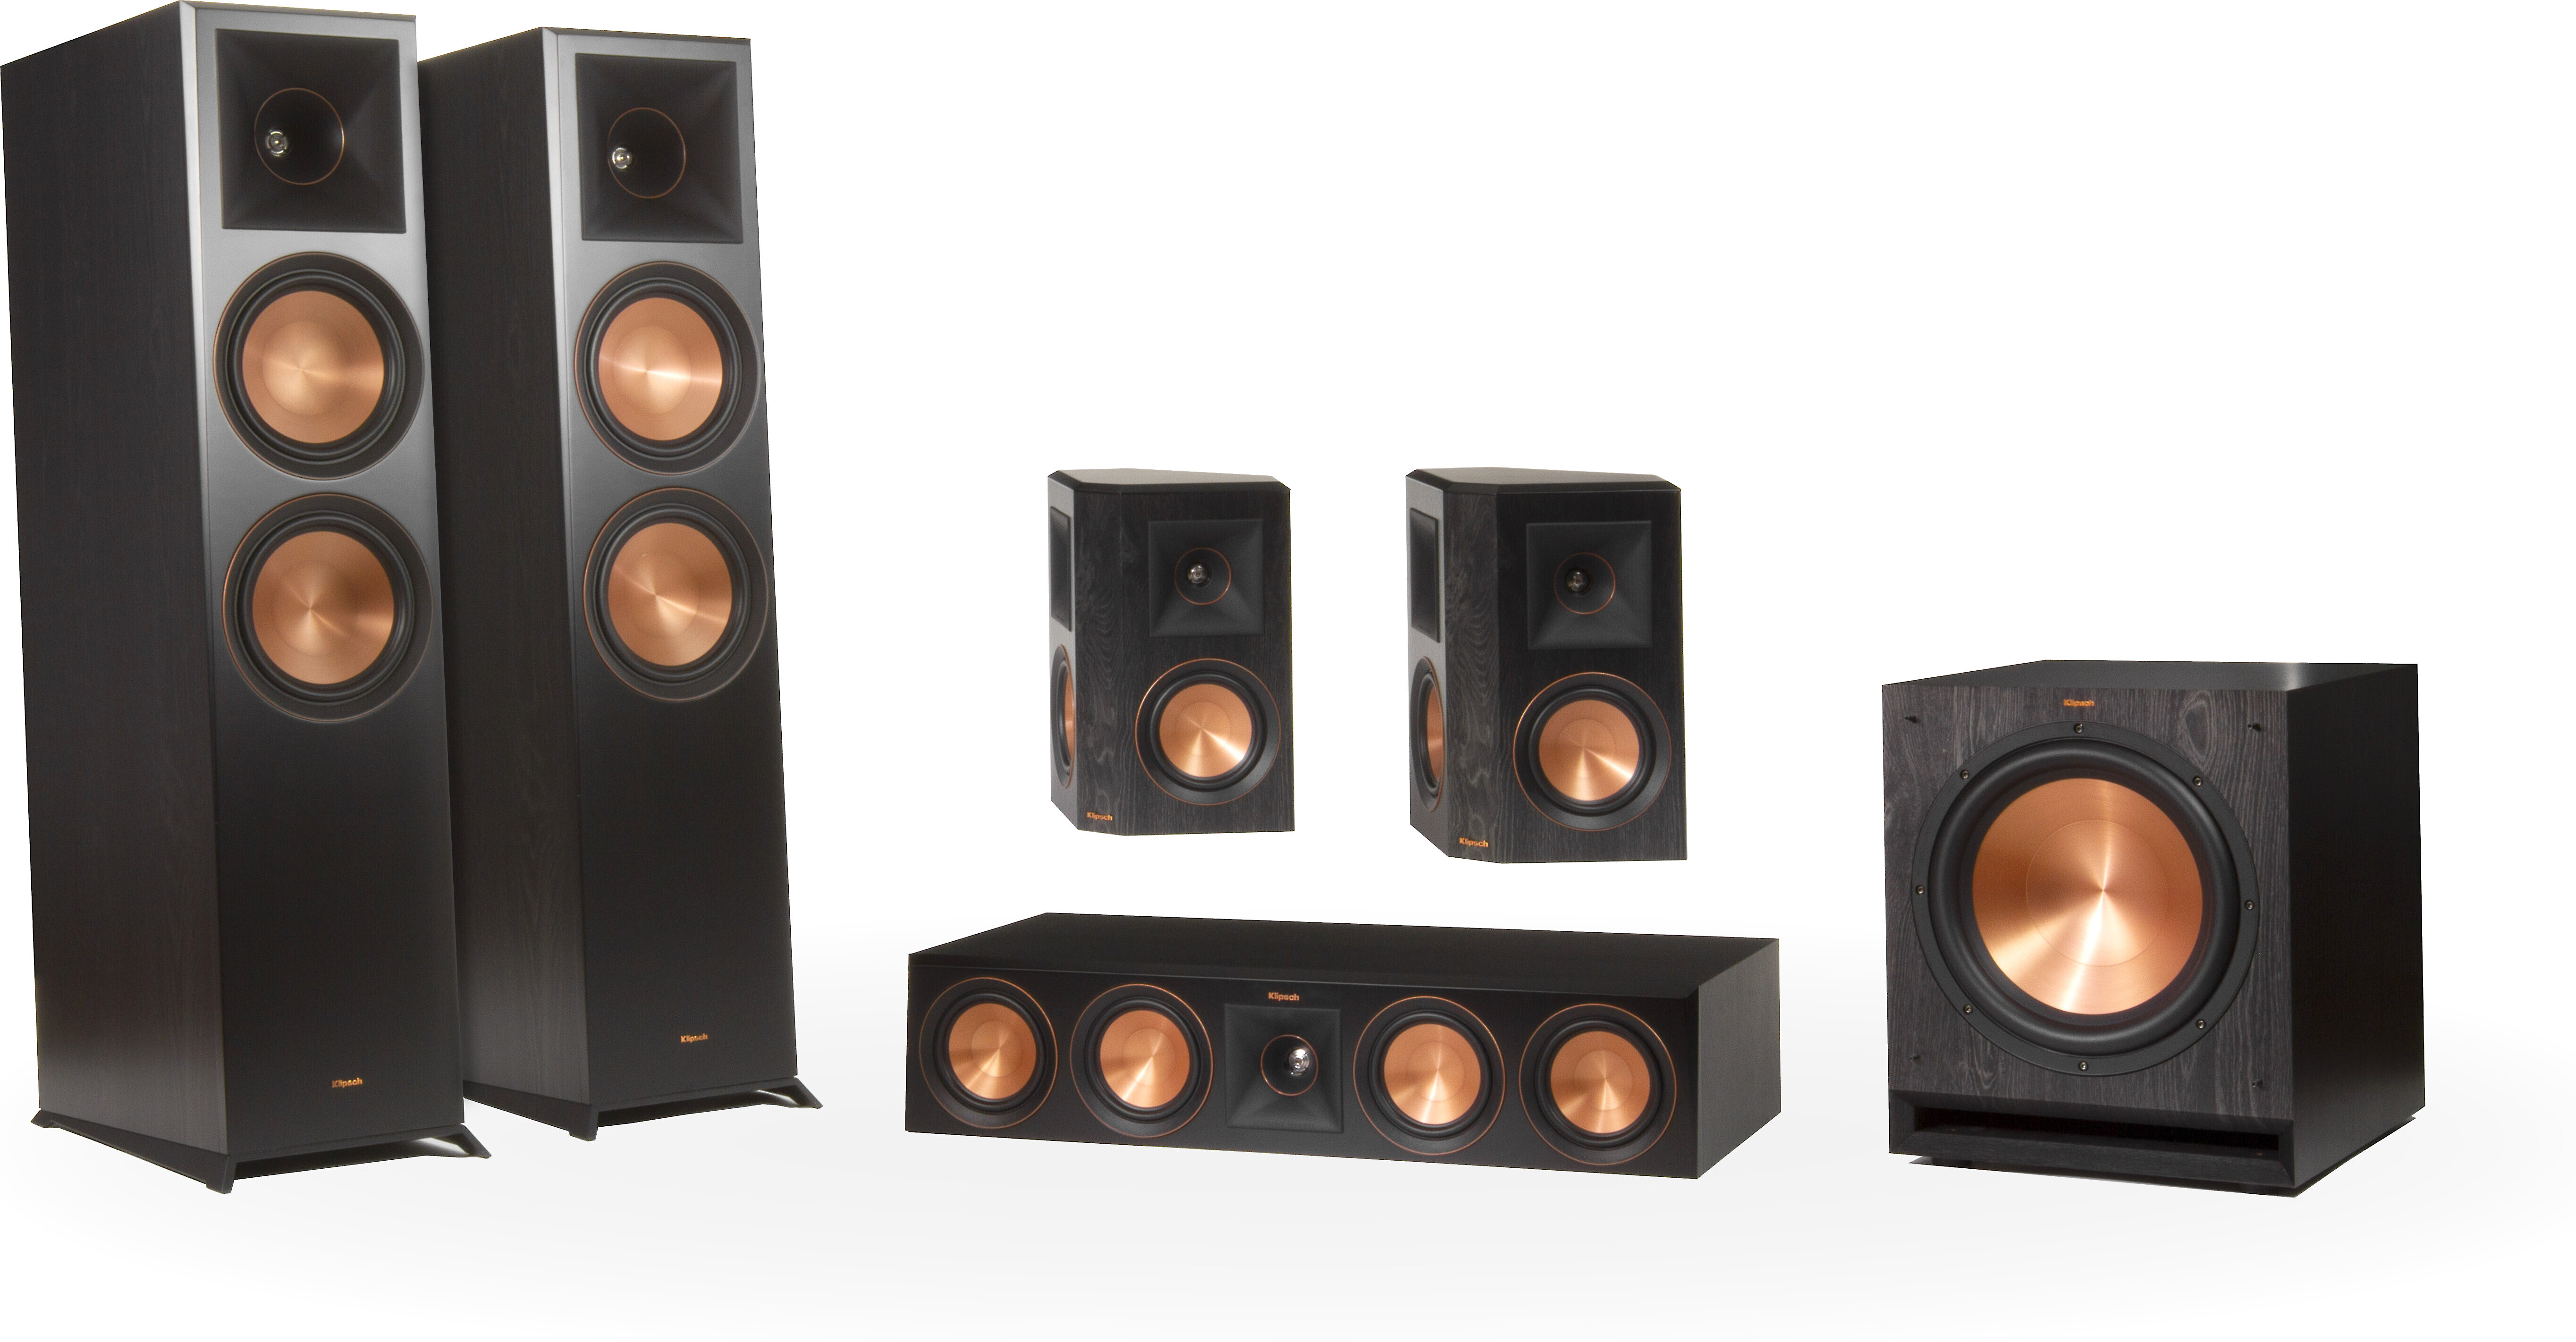 Bbk home theatre. Klipsch Rp-500sa Walnut. Klipsch r-41sa. 360 Spatial Sound Mapping Dolby Atmos® / DTS:X® Home Theater System | HT-a9. Top Speakers in Theatre.